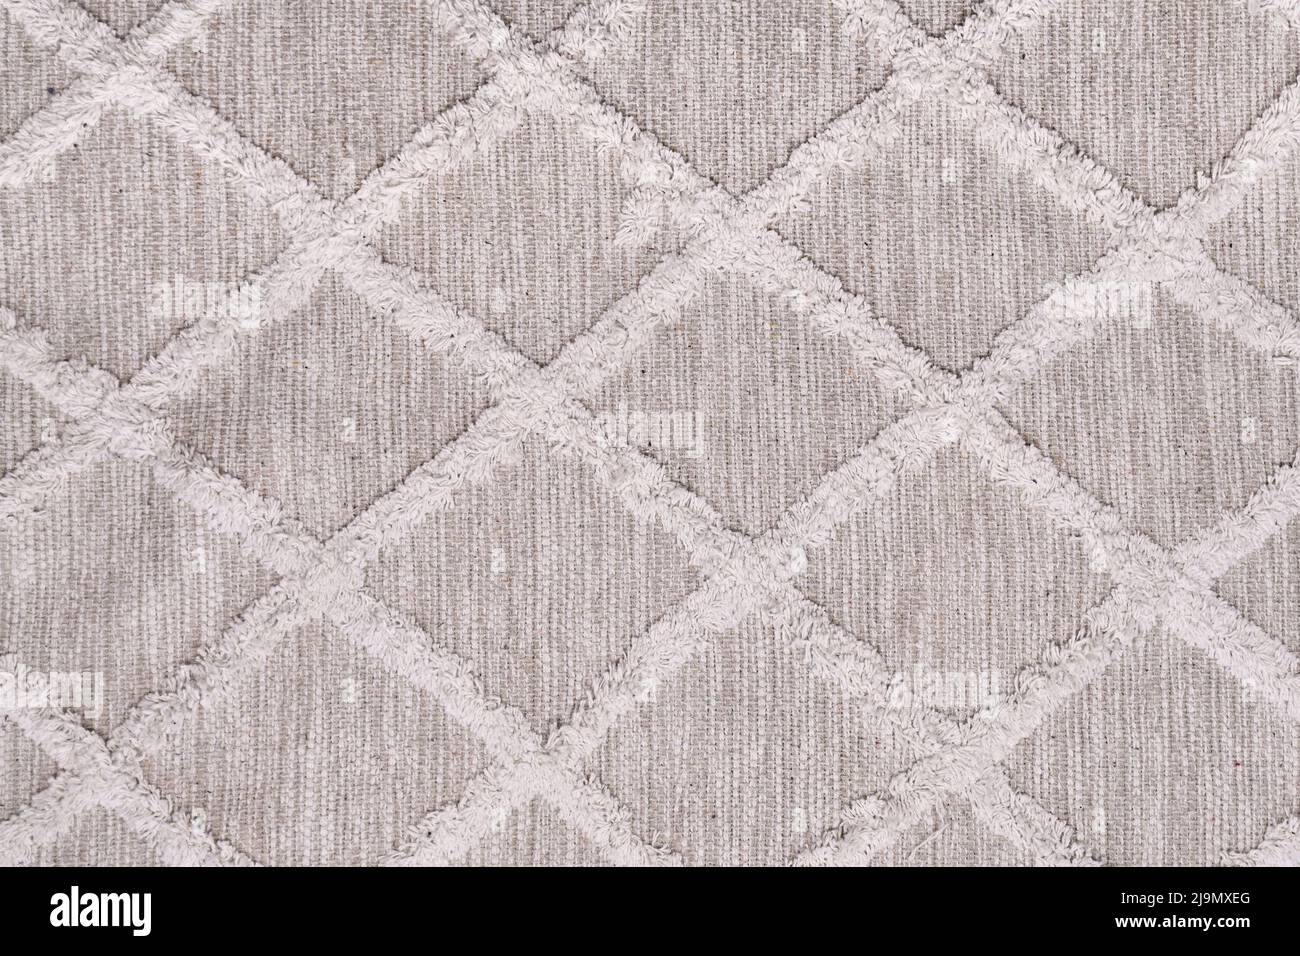 Cream colored carpet with boho style pattern Stock Photo